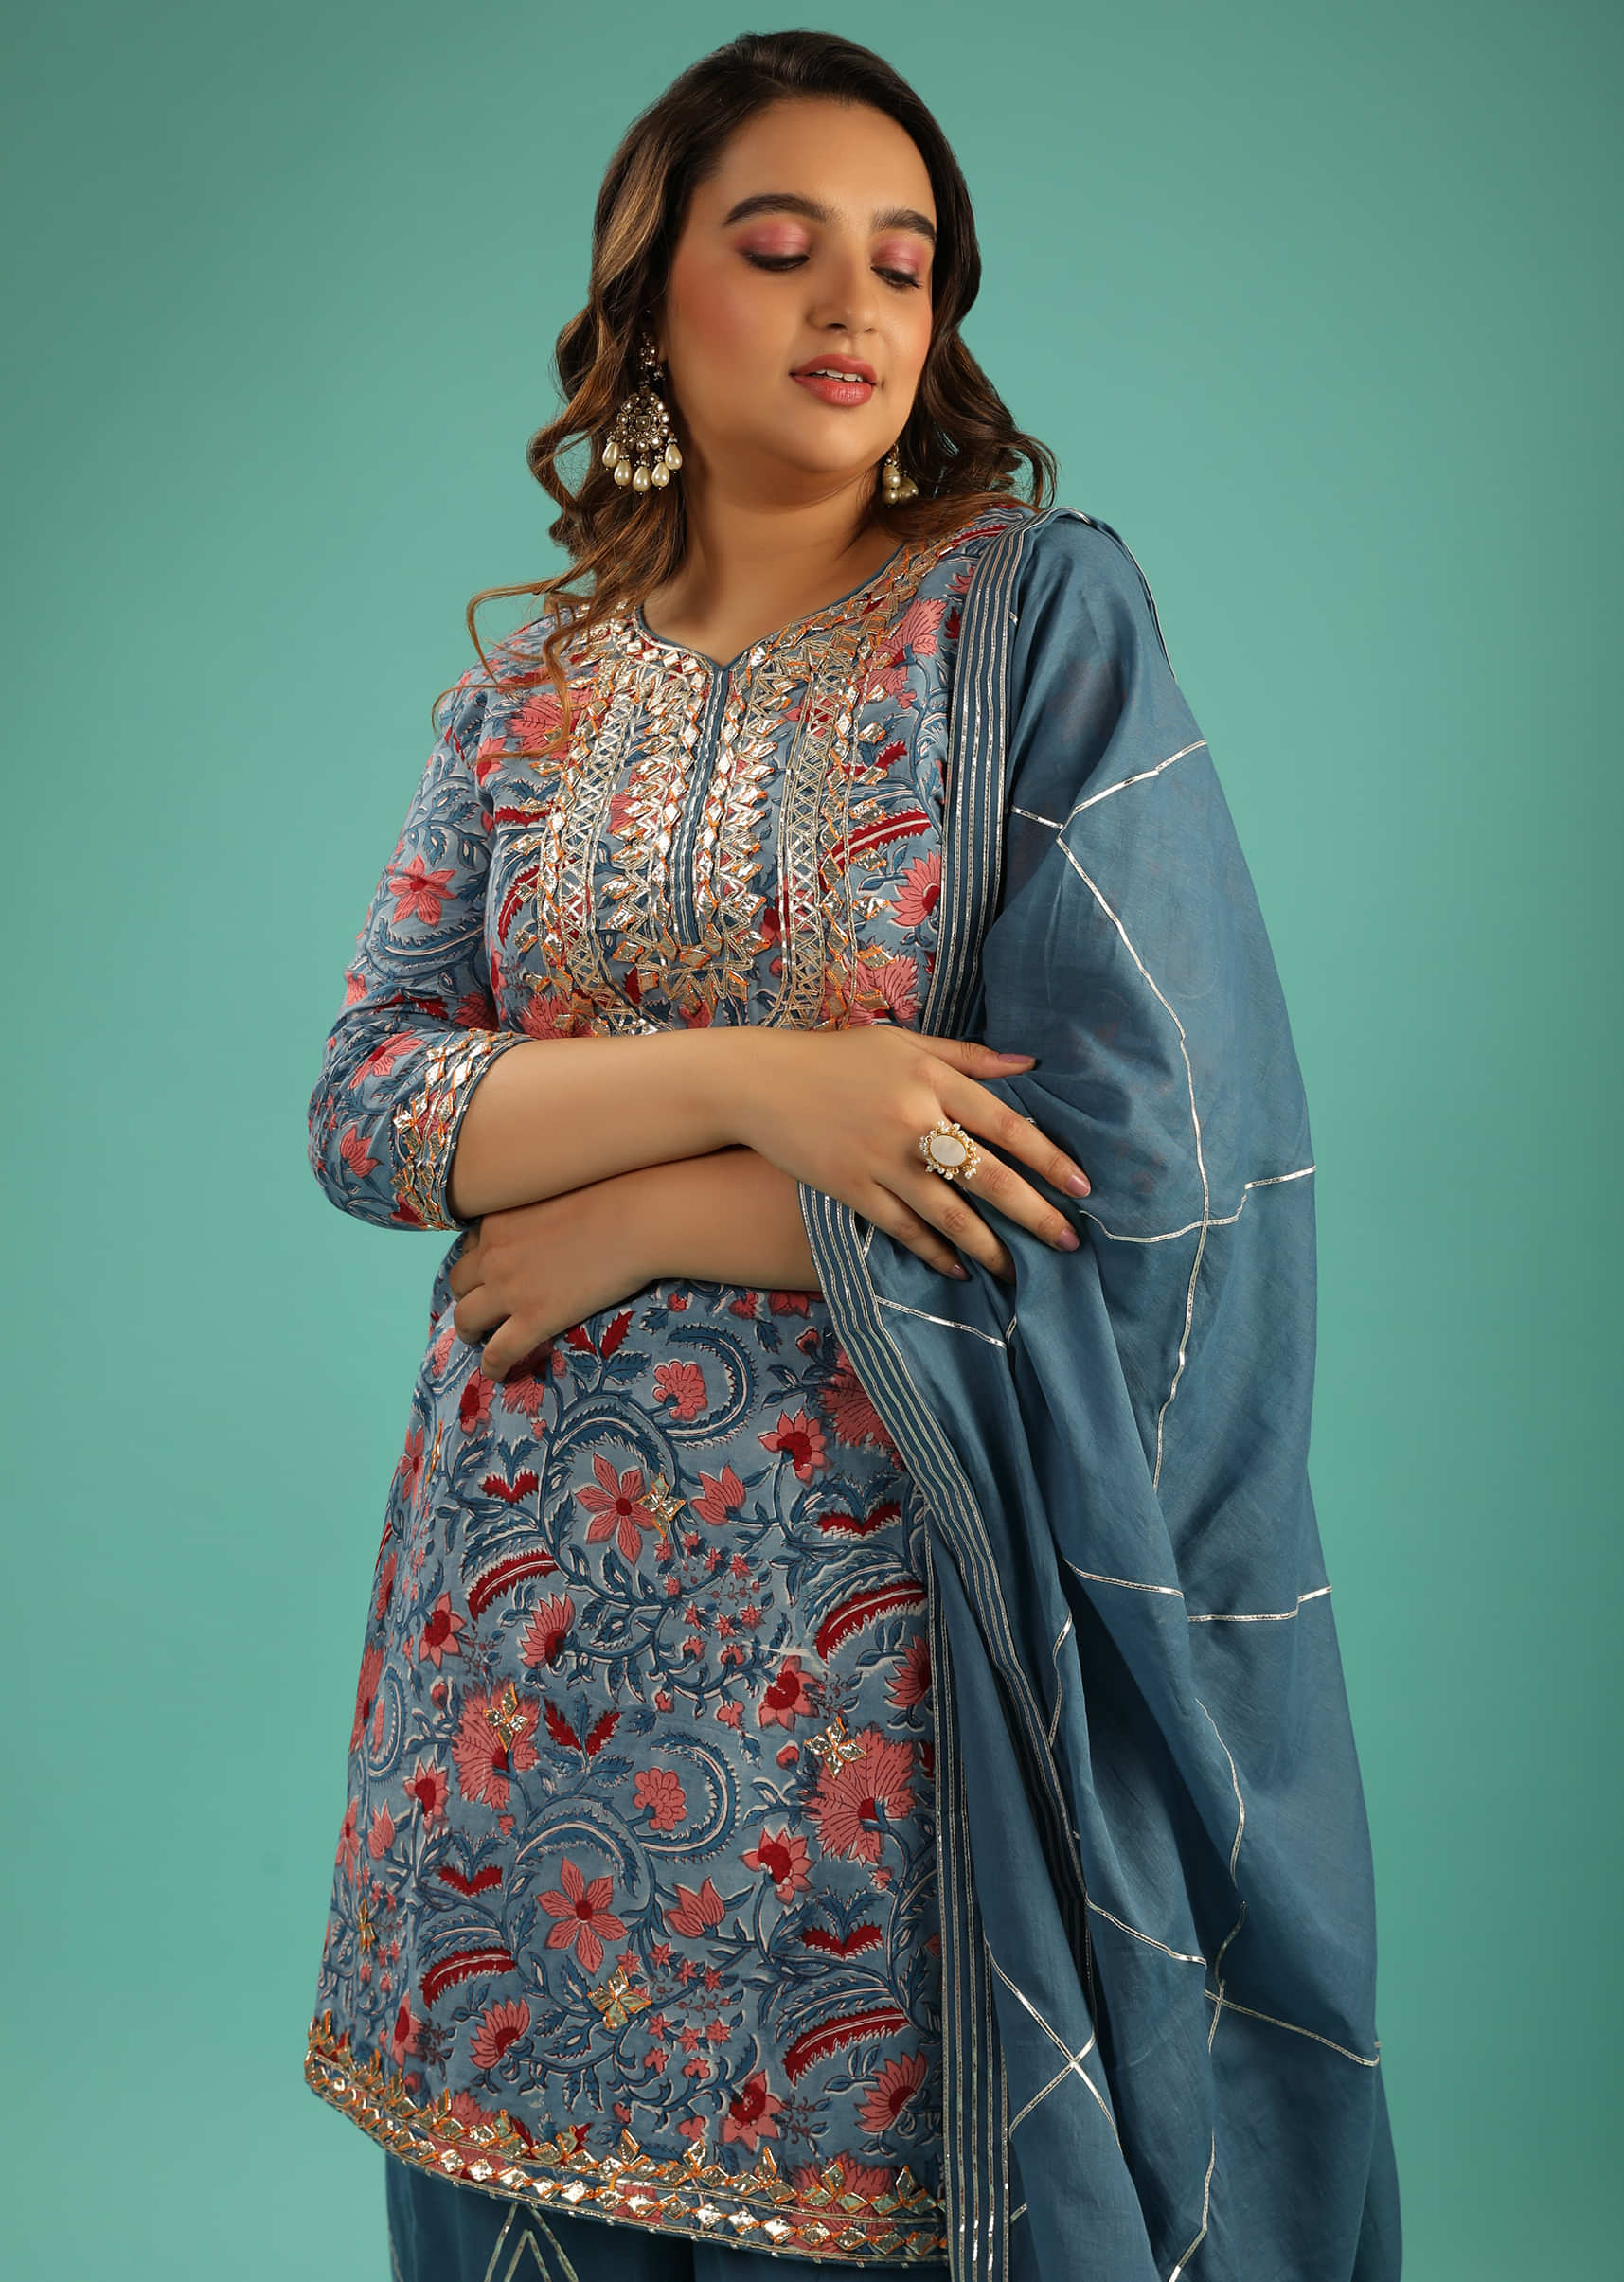 Floral-Printed Airforce Blue Sharara Suit With A Gotta Patti Embroidered Yoke.